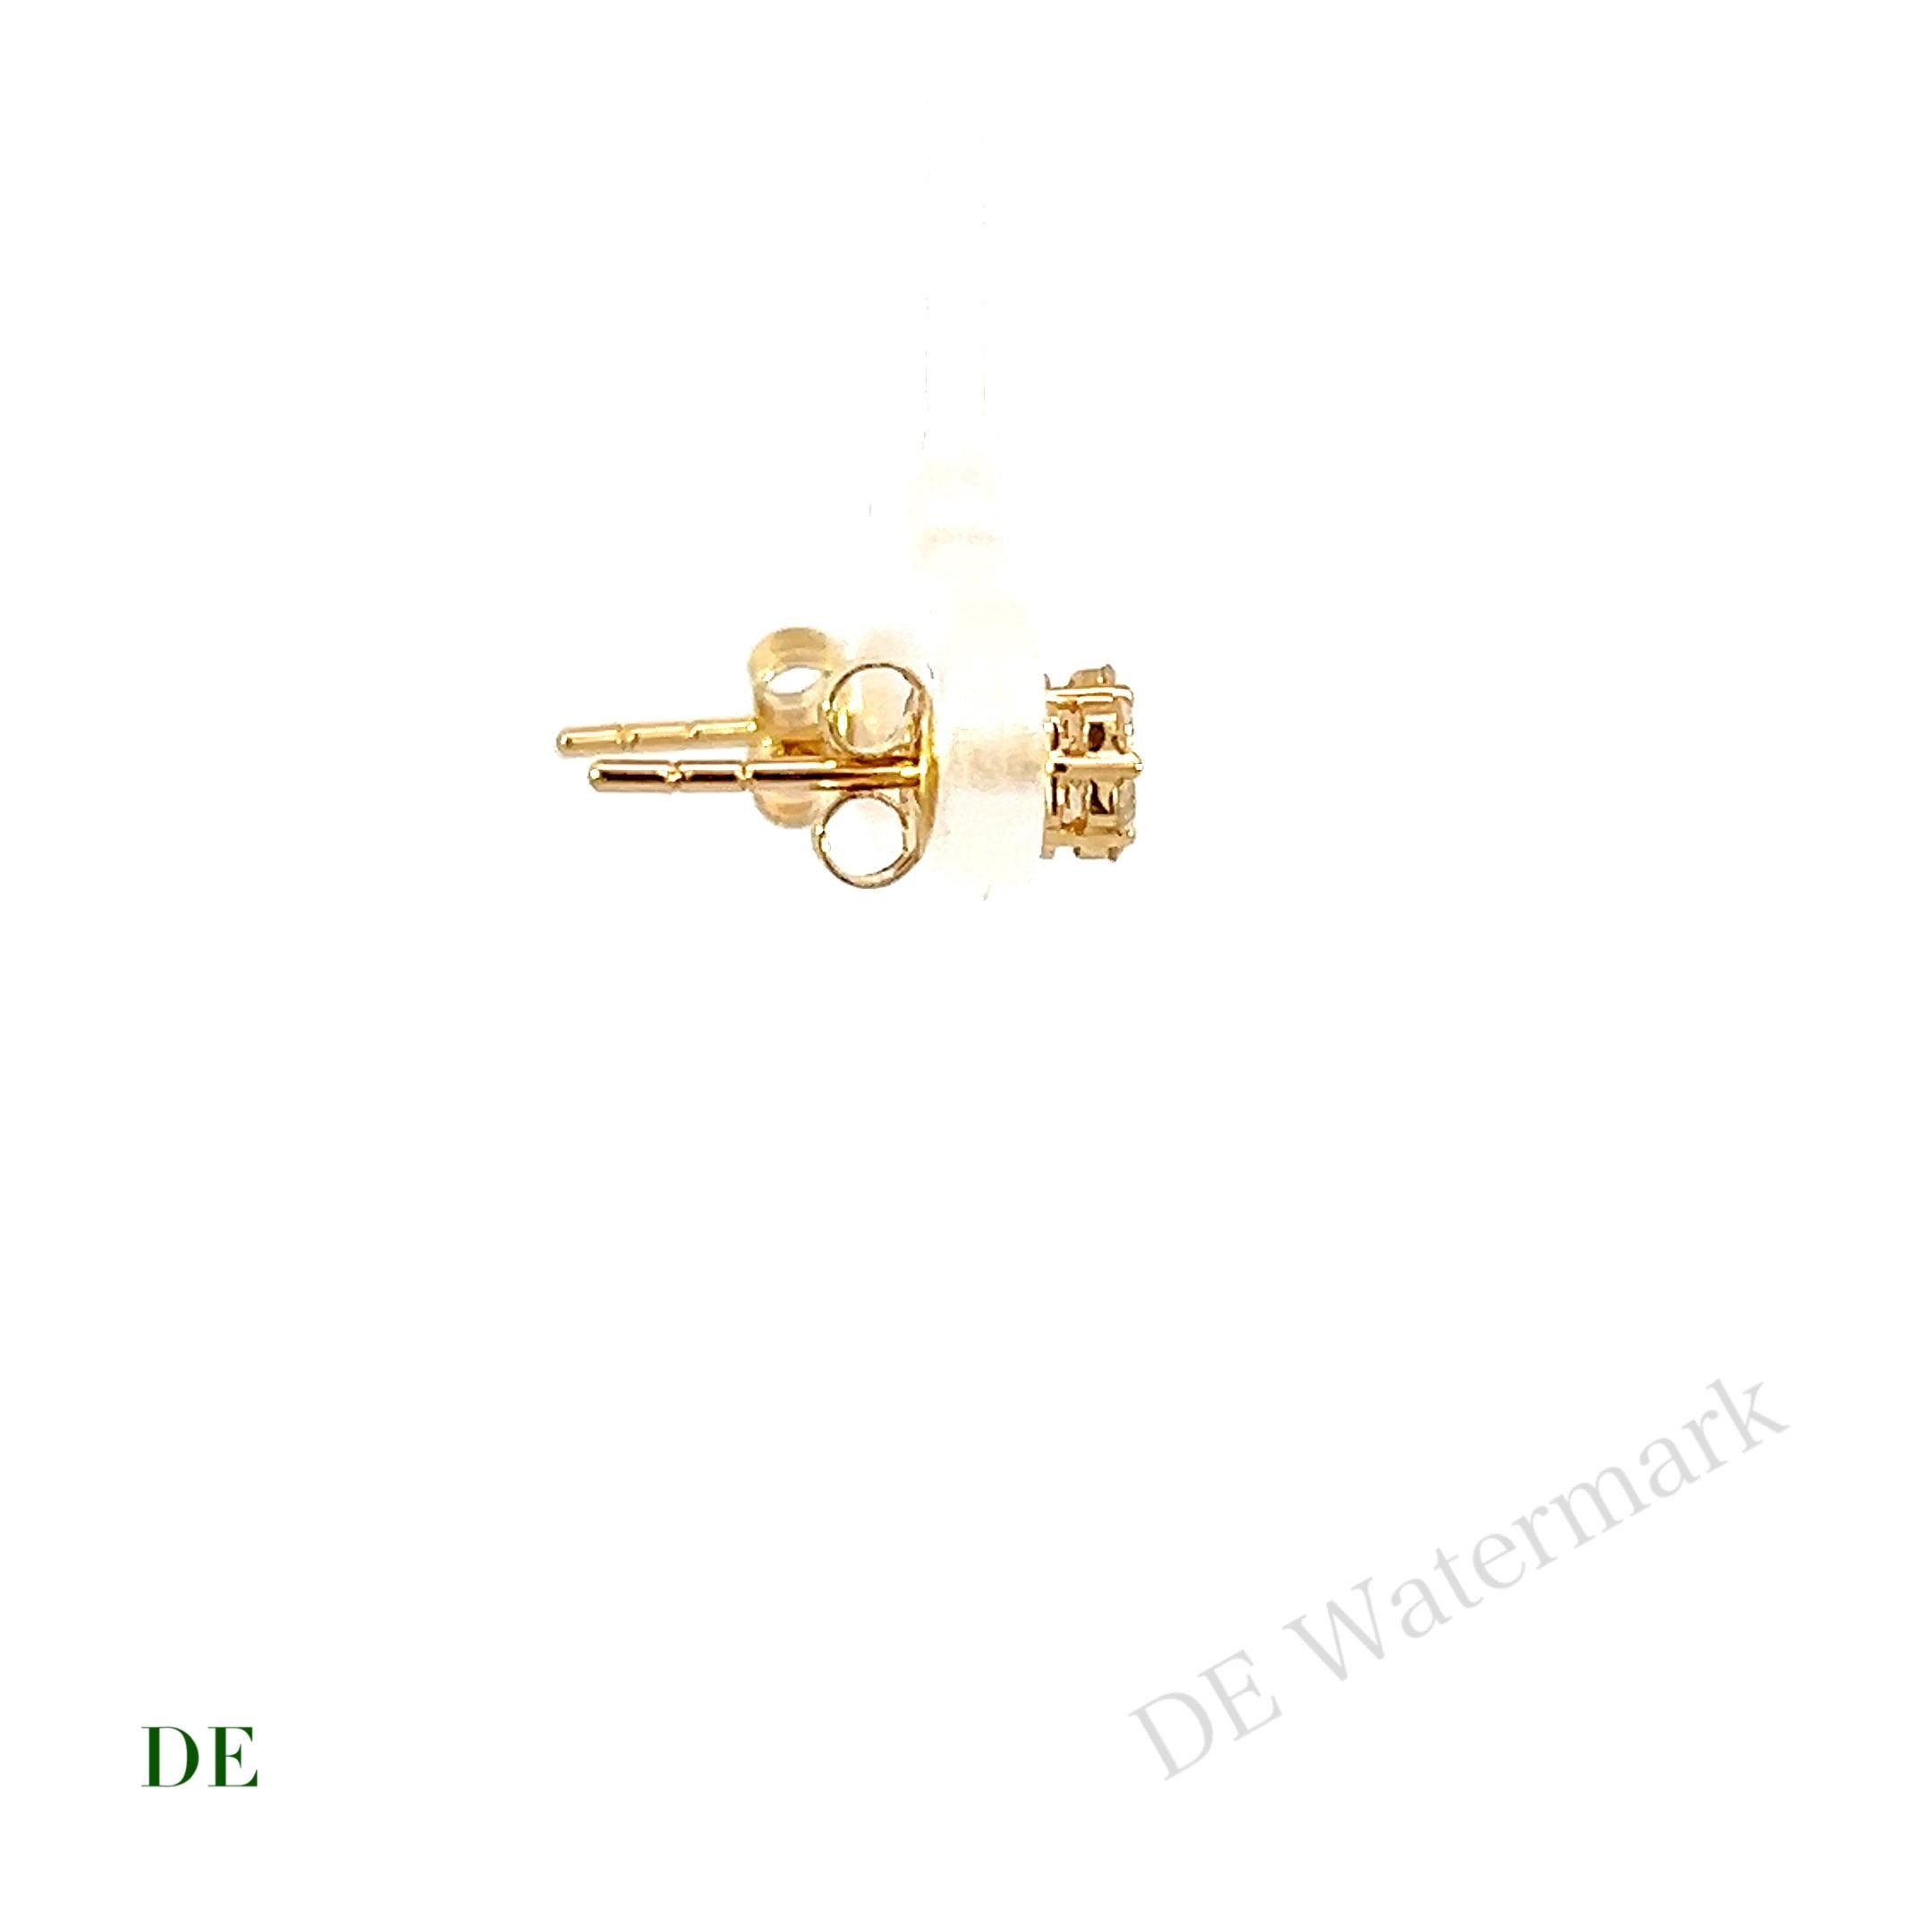 14k Yellow Gold Minimalist .28 Carat Diamond Cluster Earring Stud

Presenting our 14k Yellow Gold Minimalist .28 Carat Diamond Cluster Earring Studs. These earrings are a perfect blend of simplicity and elegance, designed for those who appreciate